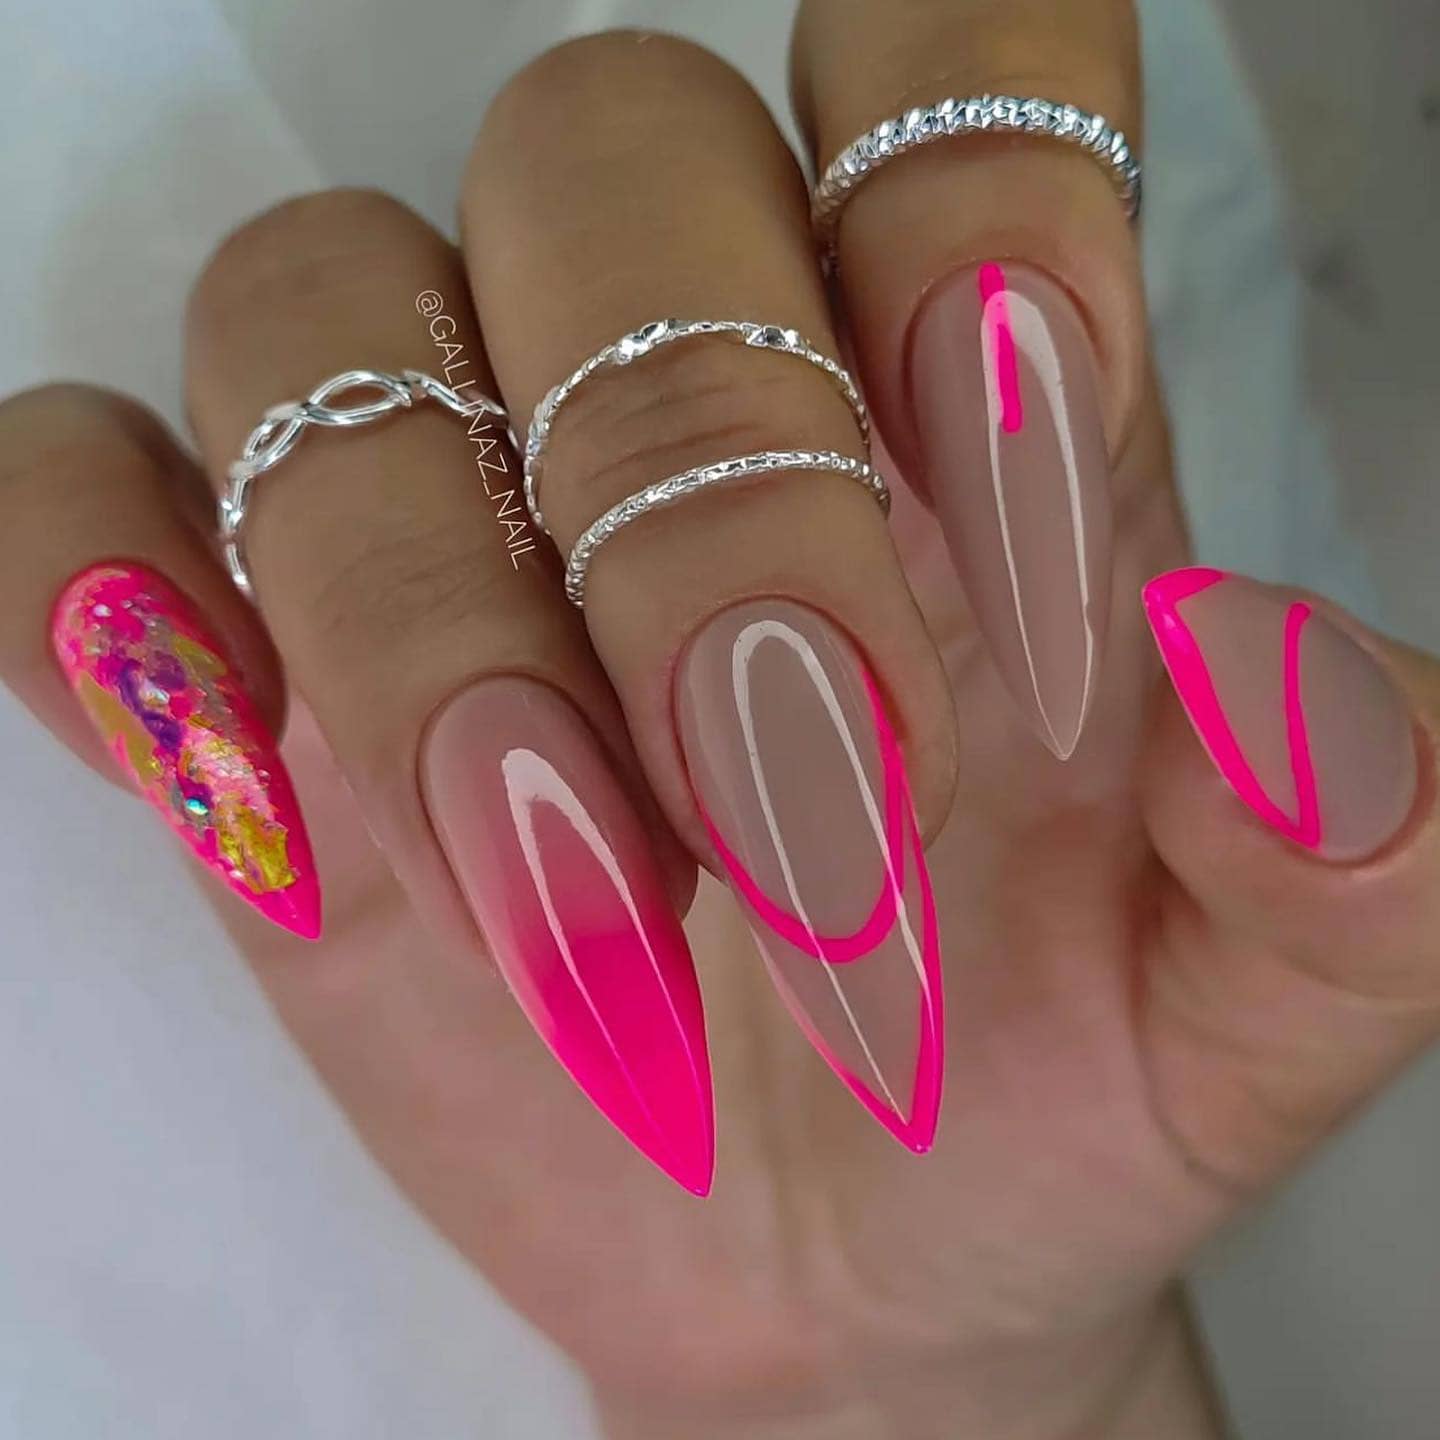 Over 100 Bright Summer Nail Art Designs That Will Be So Trendy images 99